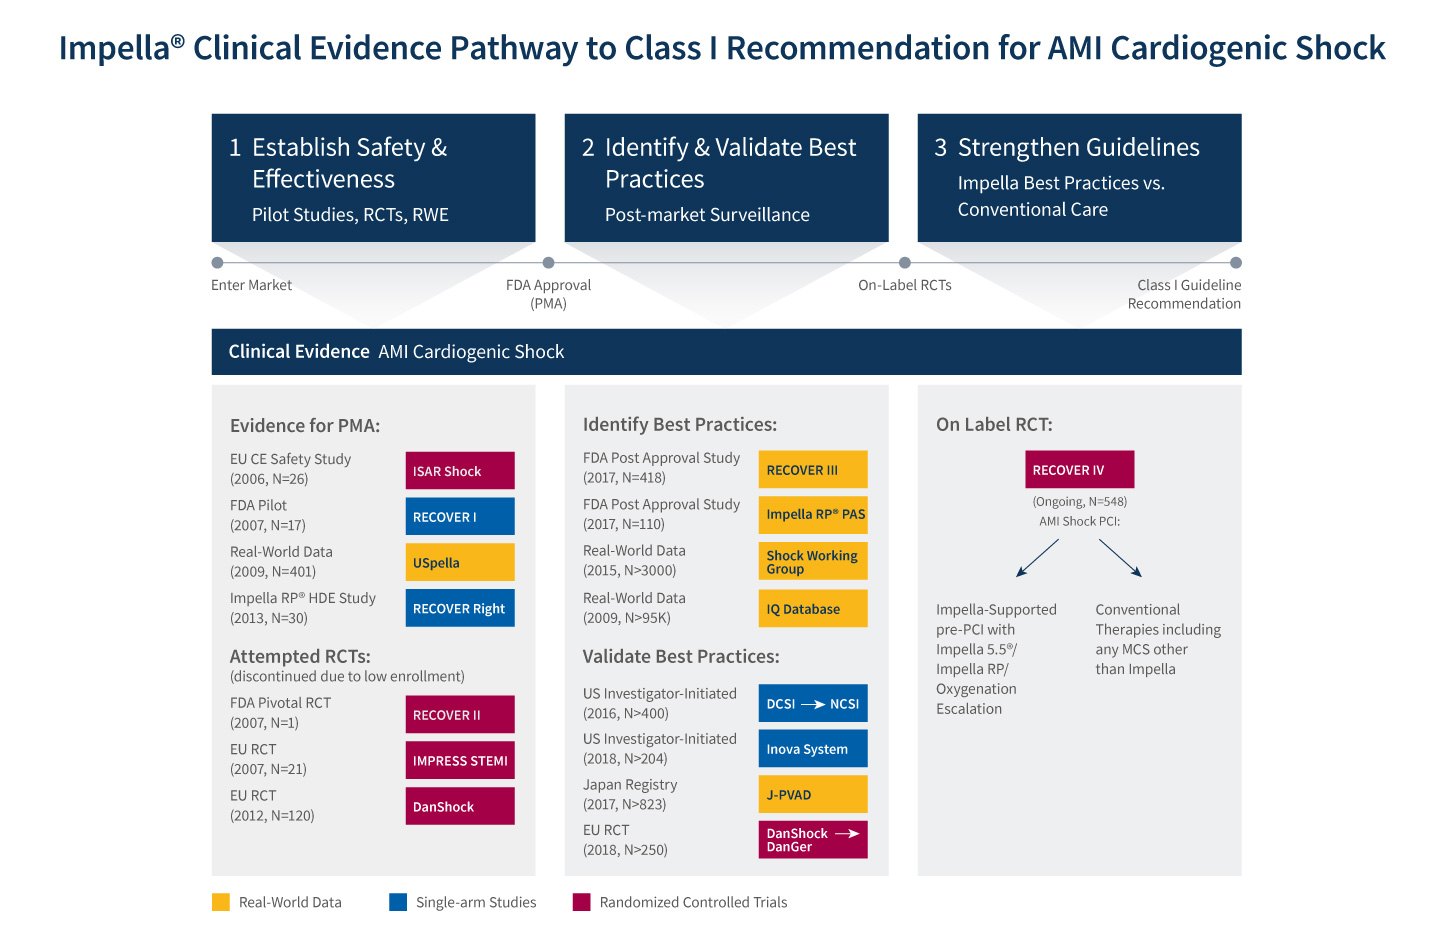 Figure 2: Impella Clinical Evidence Pathway to Class I Recommendation for AMI Cardiogenic Shock